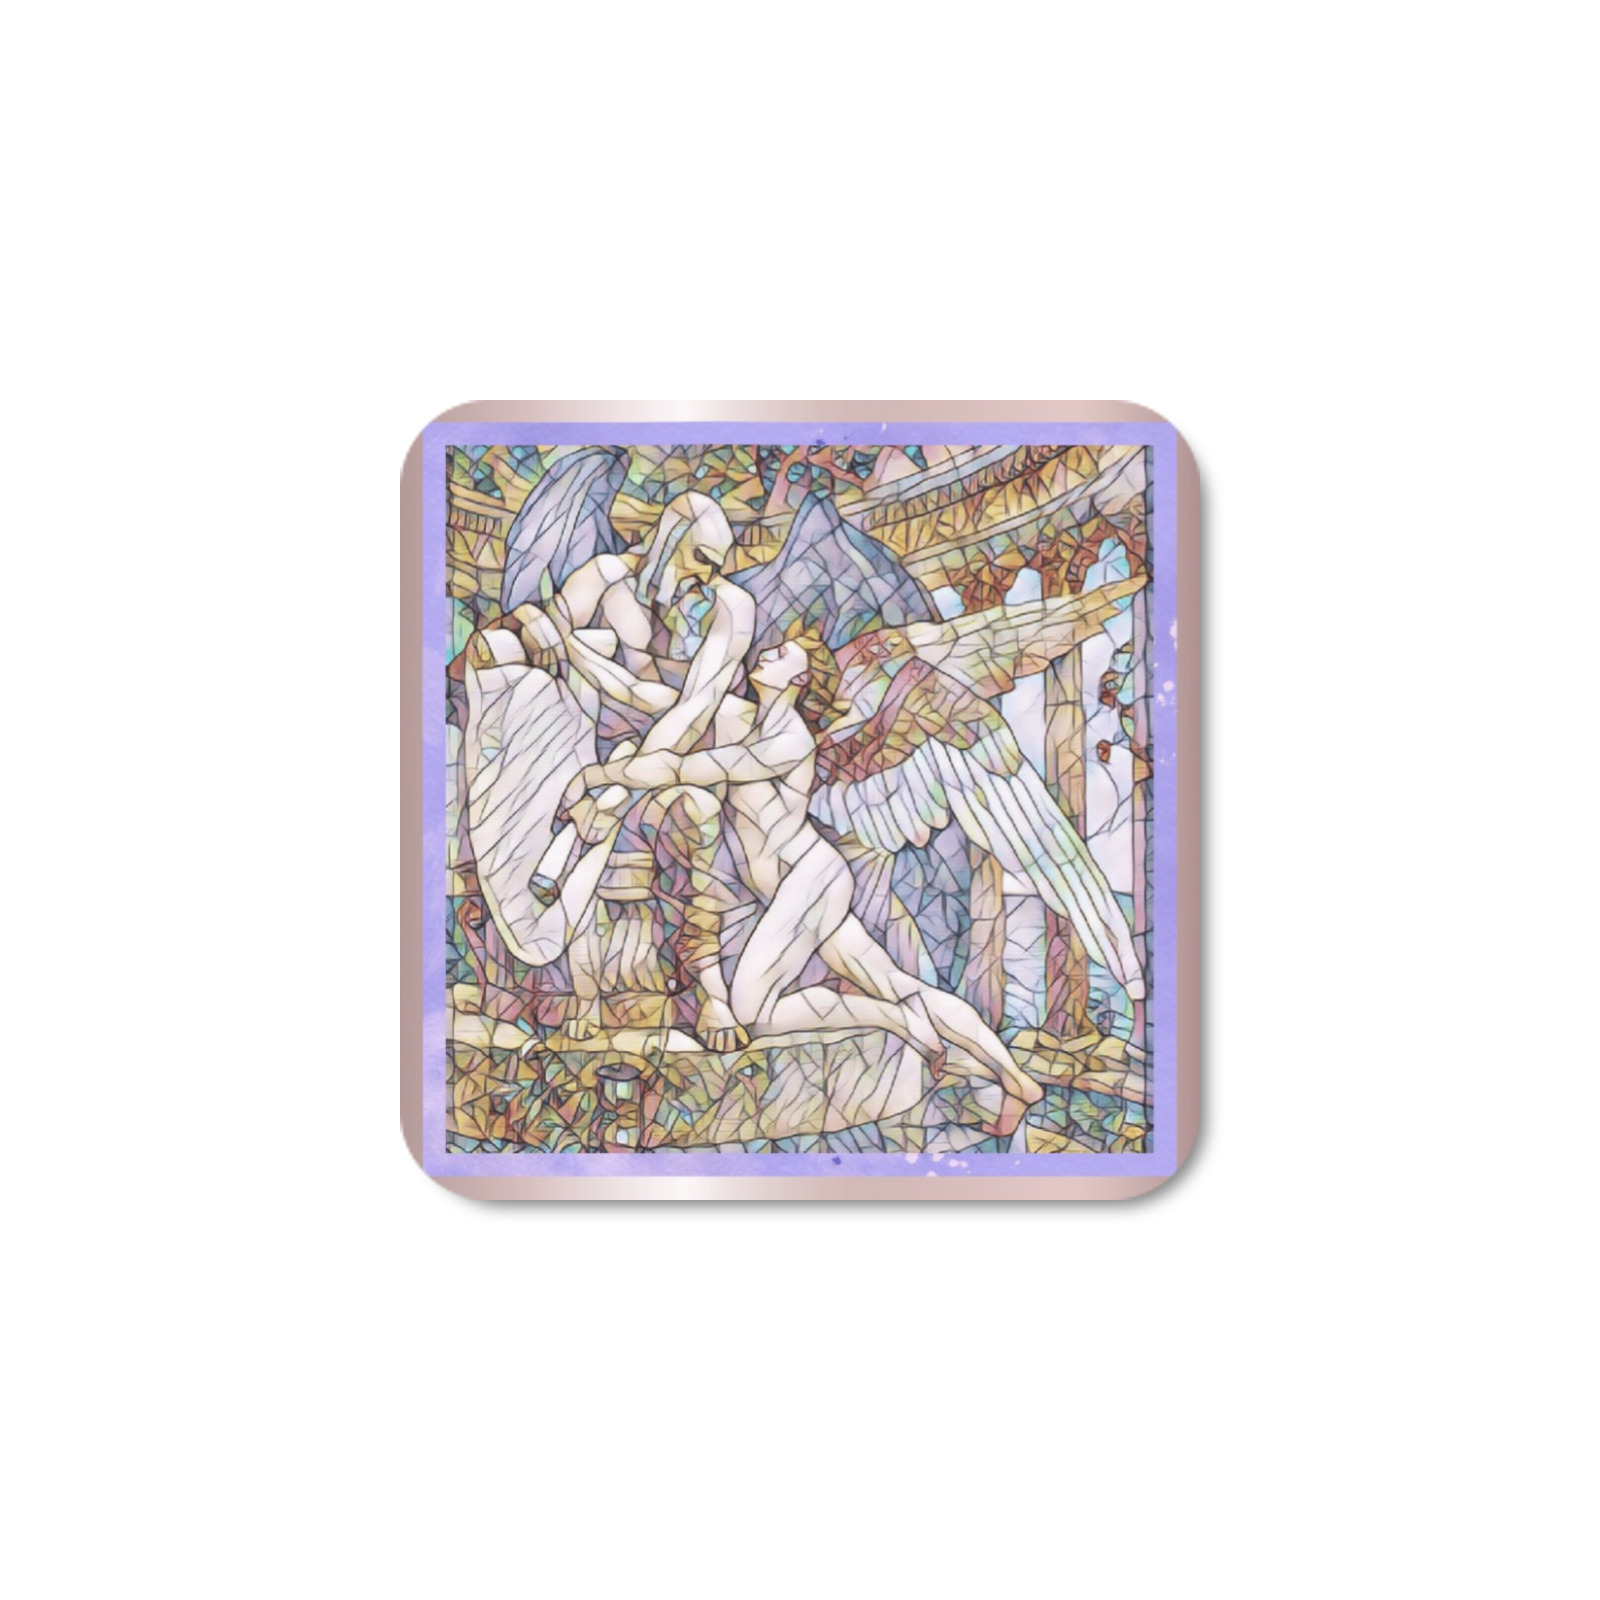 Second Remastered Version of The Roll of Fate by Walter Crane Square Fridge Magnet